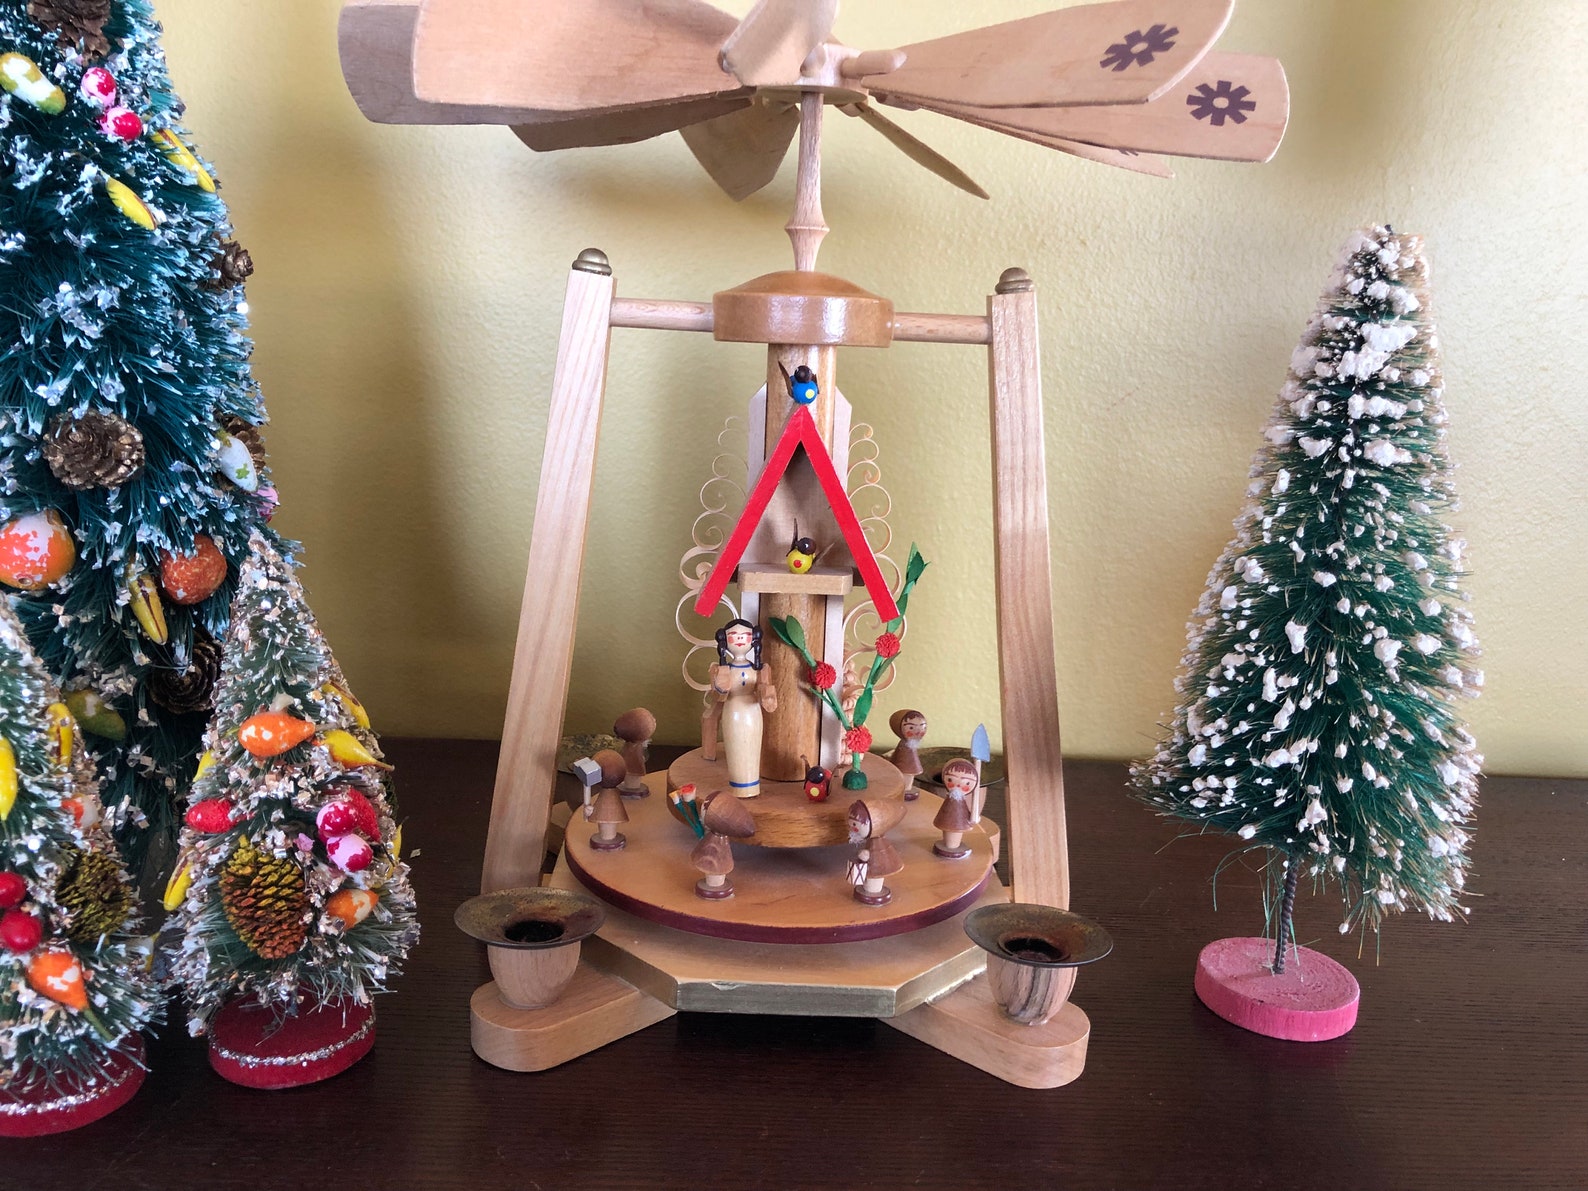 VINTAGE GERMAN PYRAMID #2 - It's beginning to look a lot like Christmas!